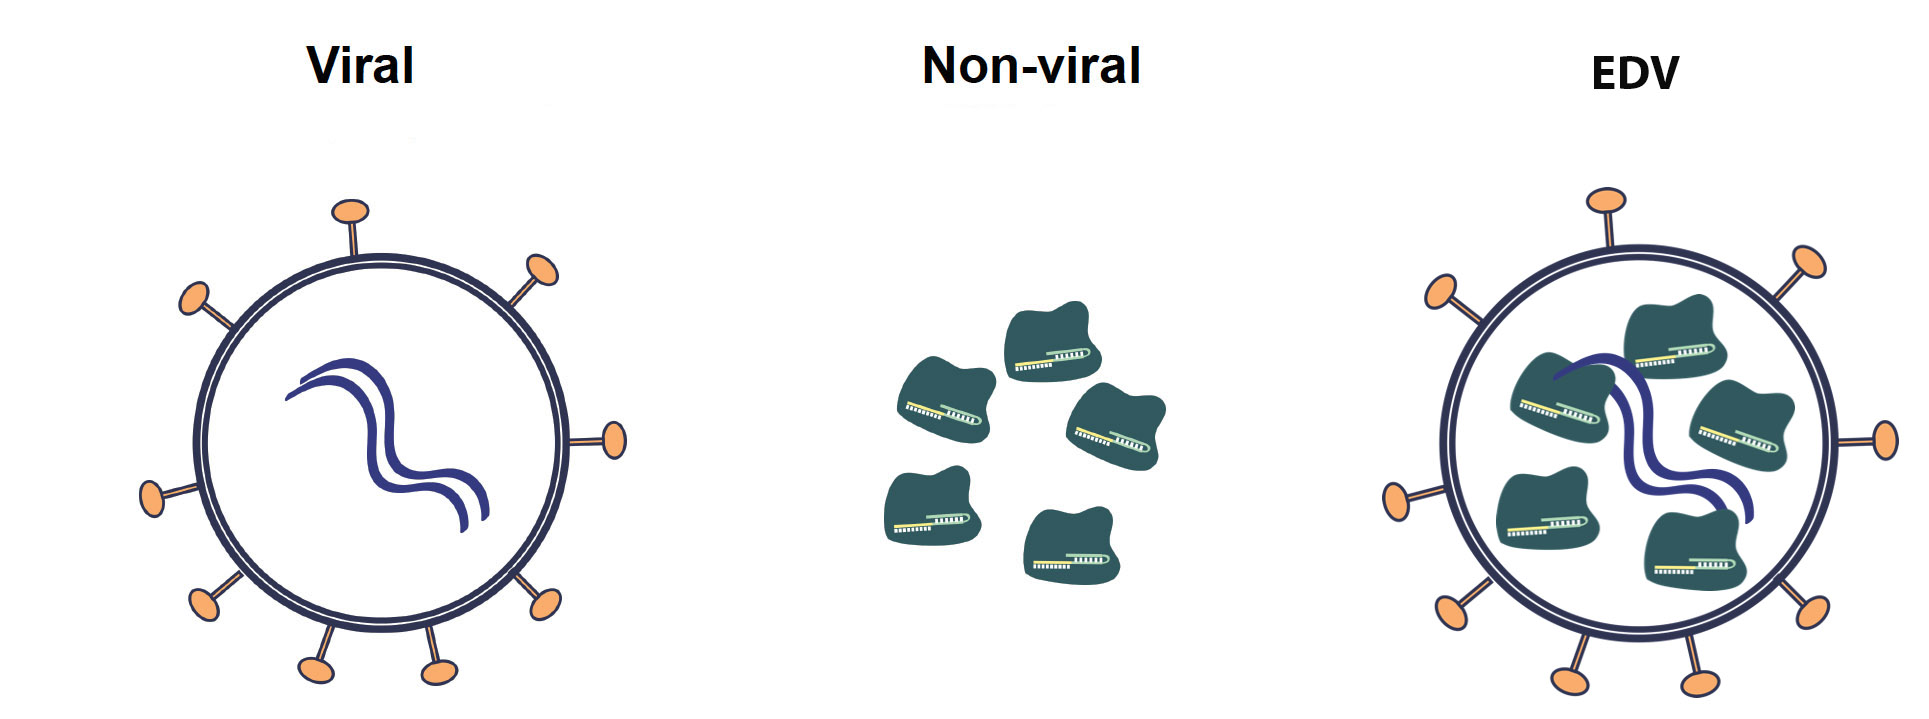 Diagram showing 3 strategies for delivering gene editing tools: viral, a circle with spikes coming off it and two squiggles in the middle, nonviral, 5 green lumps, or EDV, the nonviral and viral images put together.